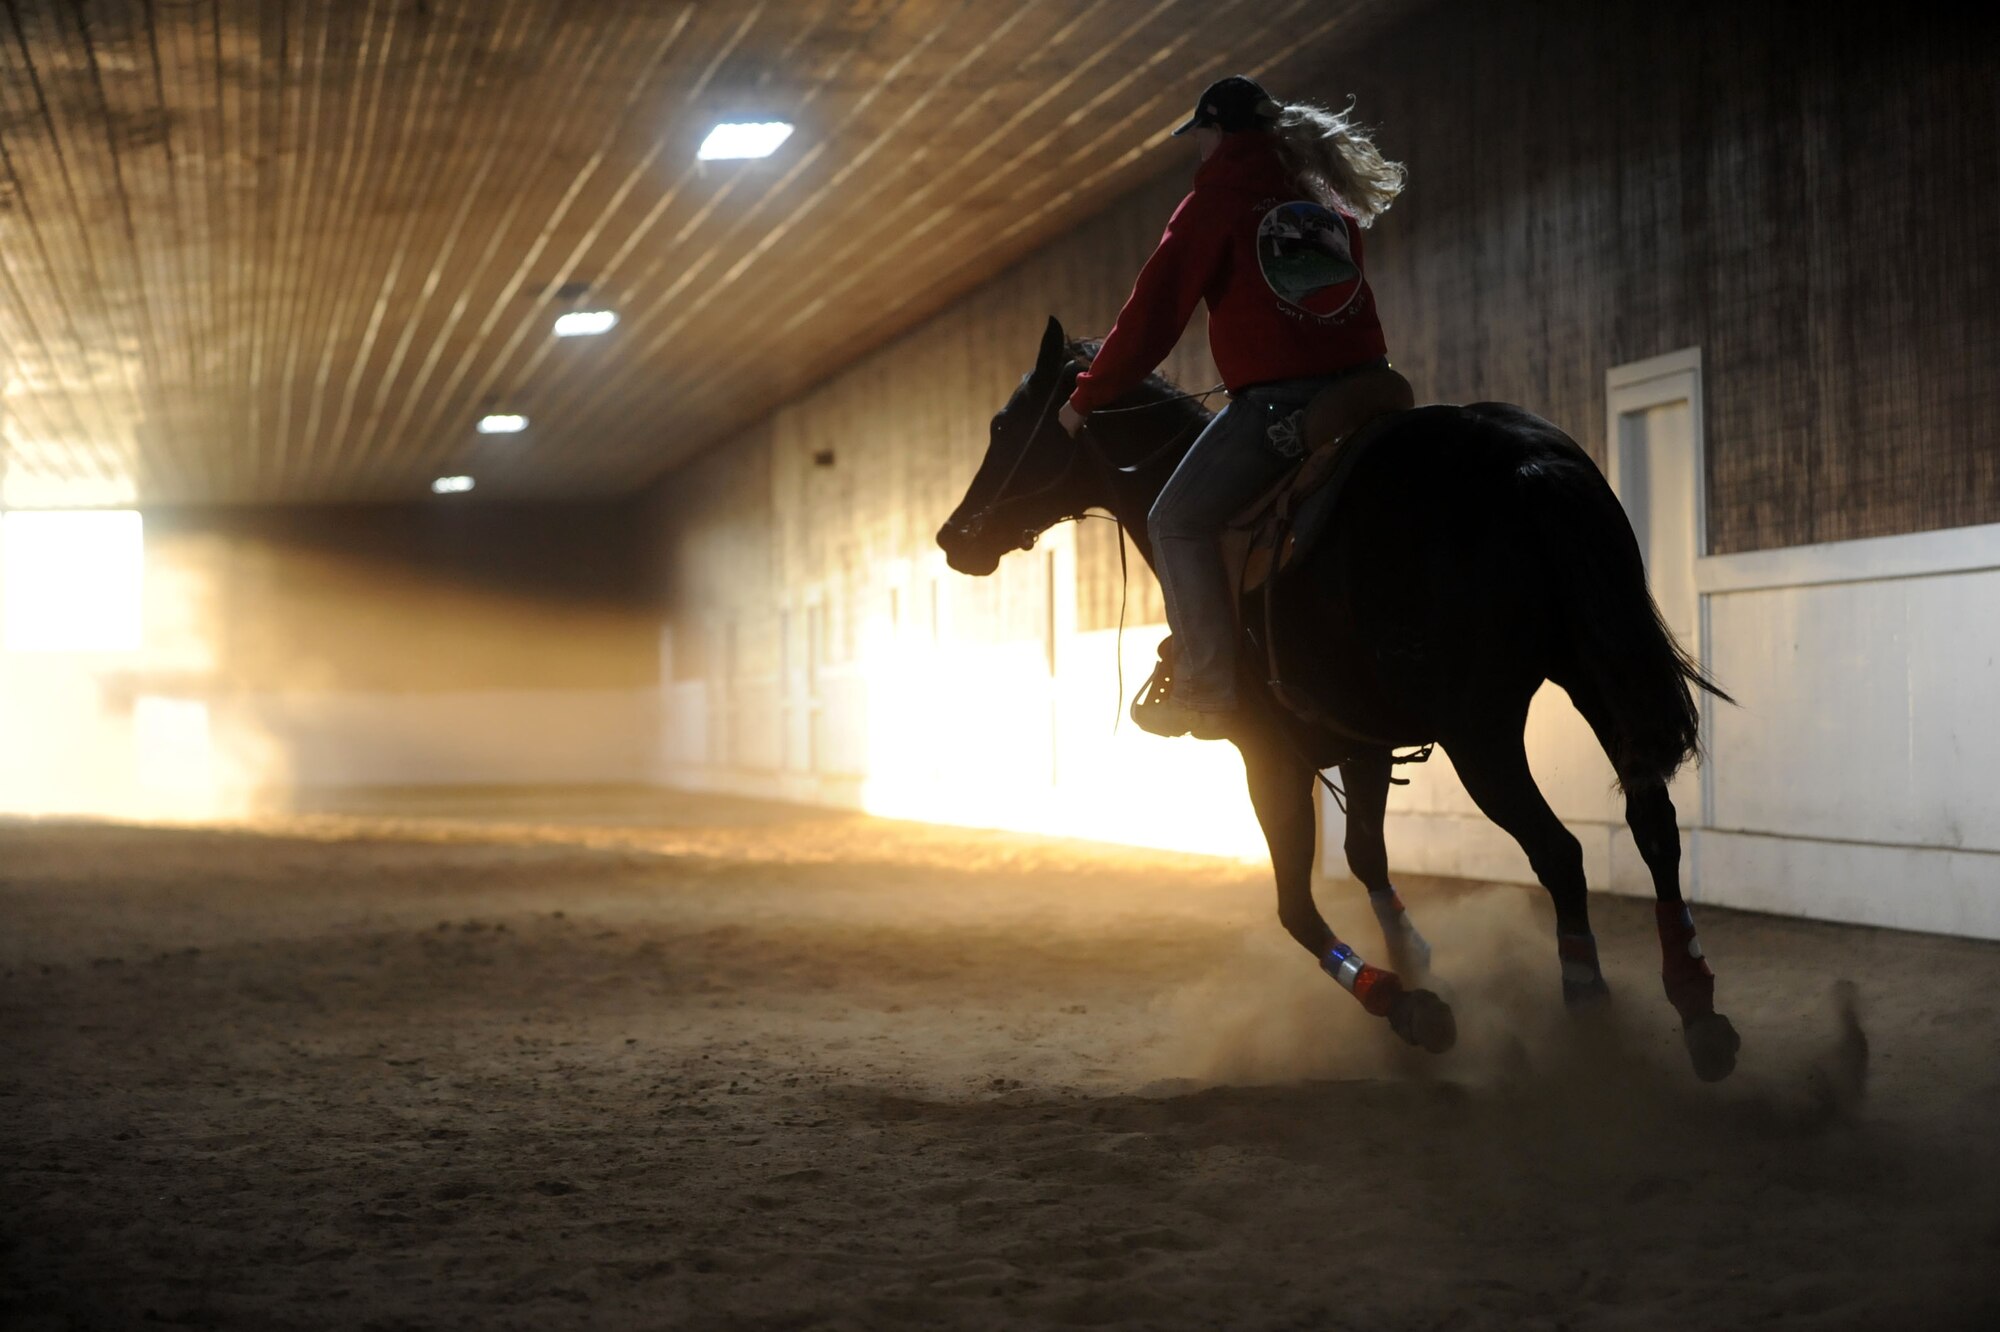 Airman 1st Class Lauren Nolan, 22nd Logistics Readiness Squadron materials management journeyman, practices her barrel racing patterns with her horse, Shoobie, Oct. 13, 2016, in Wichita, Kan. Shoobie is a 6 year old off-the-track thoroughbred. Nolan works with her to train for barrel racing competitions.  (U.S. Air Force photo/ Airman 1st Class Jenna K. Caldwell)